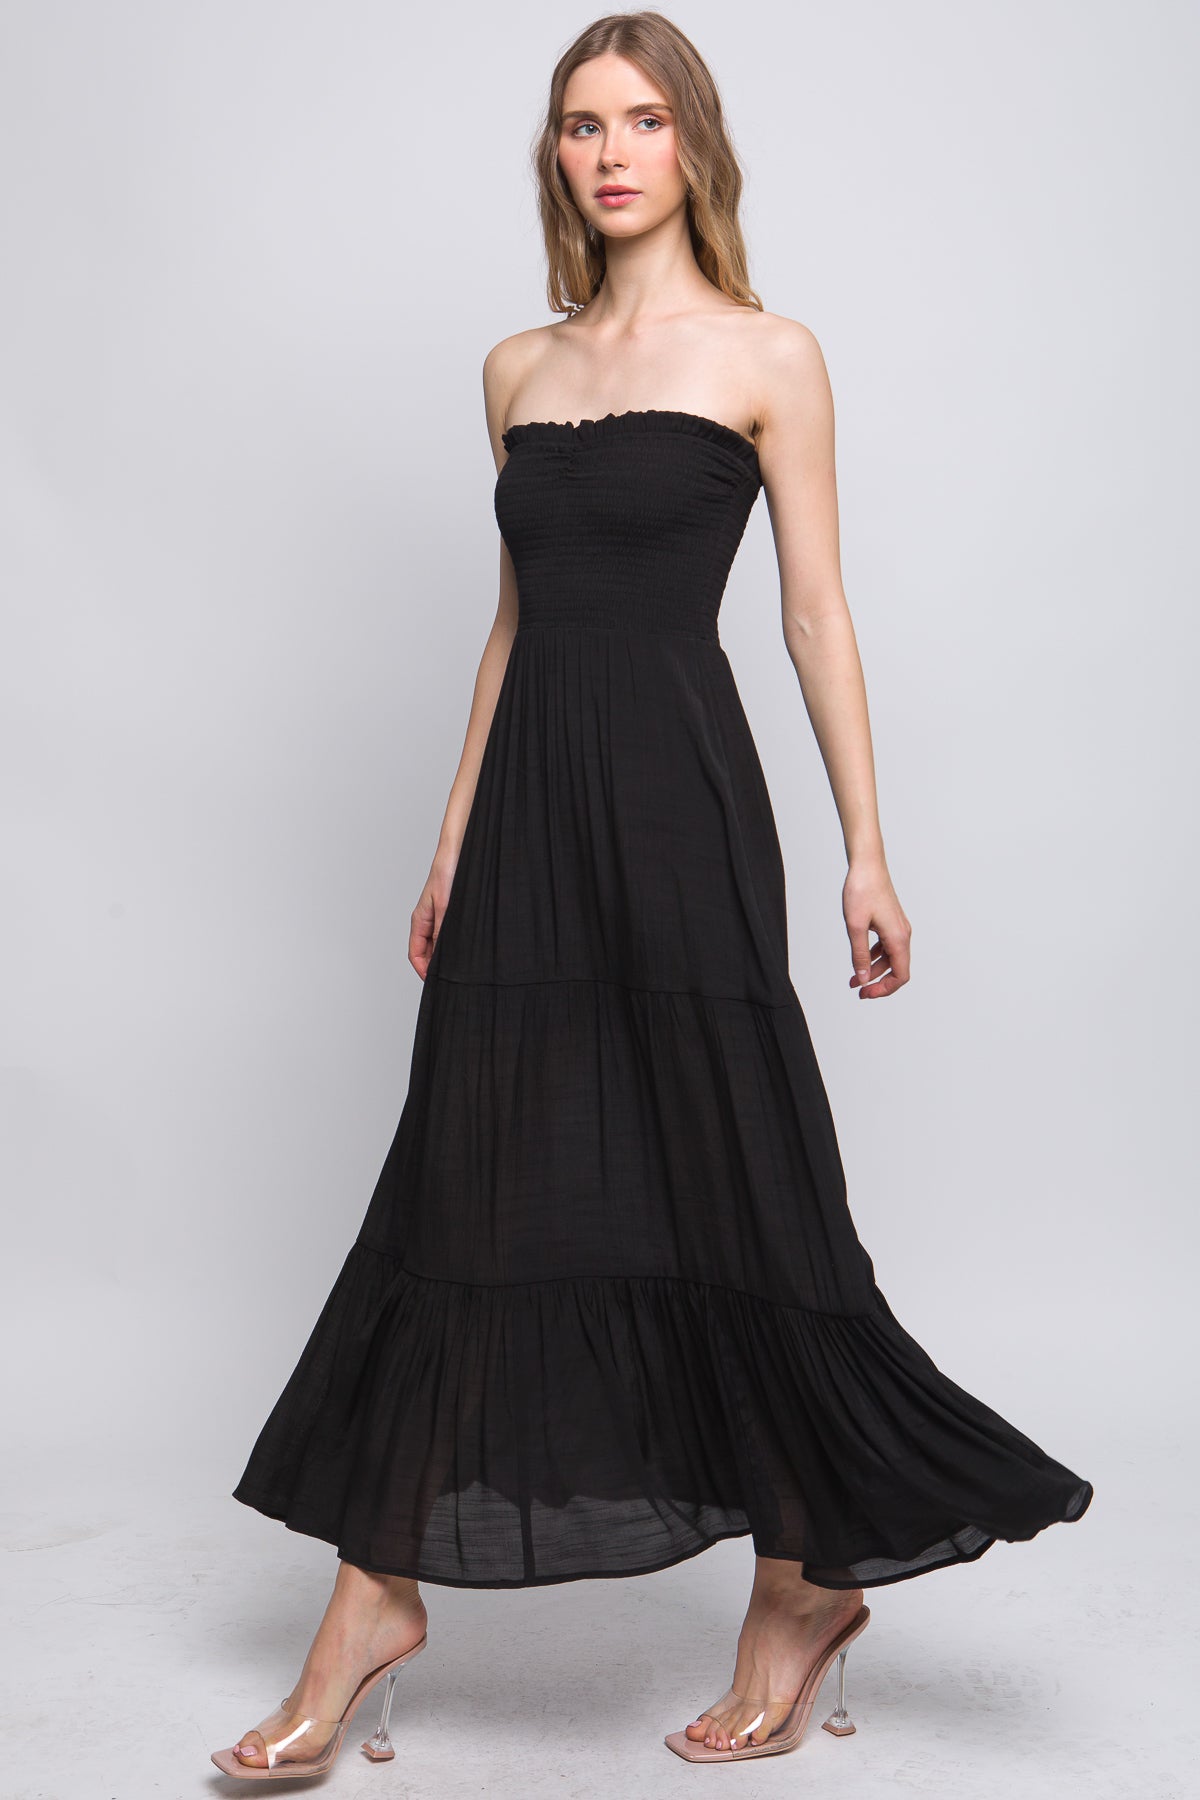 - Light Flow Strapless Maxi Dress - 6 colors - ships from The US - womens dress at TFC&H Co.